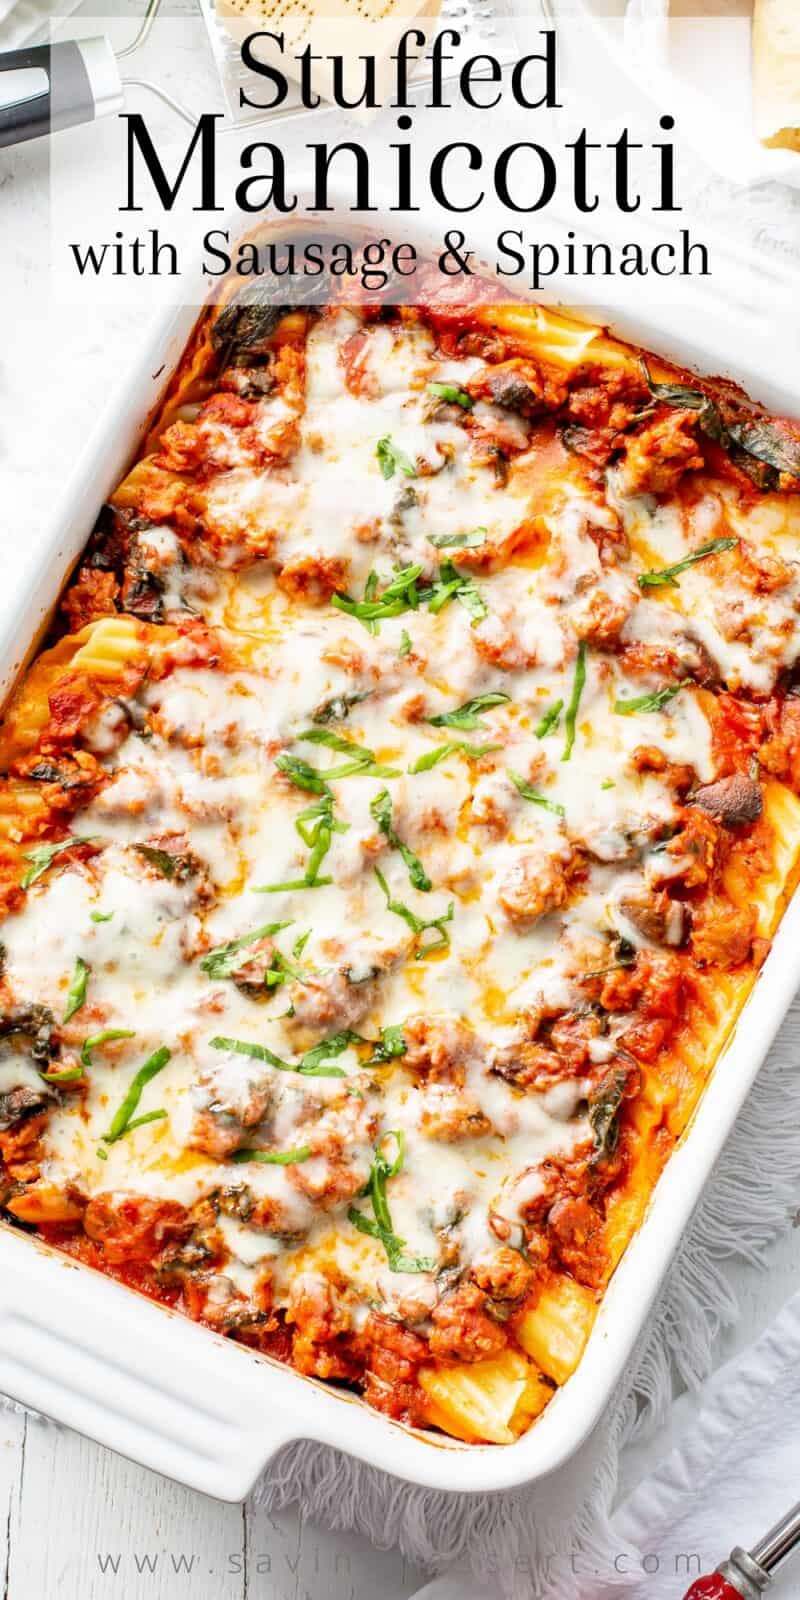 A casserole dish filled with Stuffed Manicotti Shells with sausage cheese and spinach